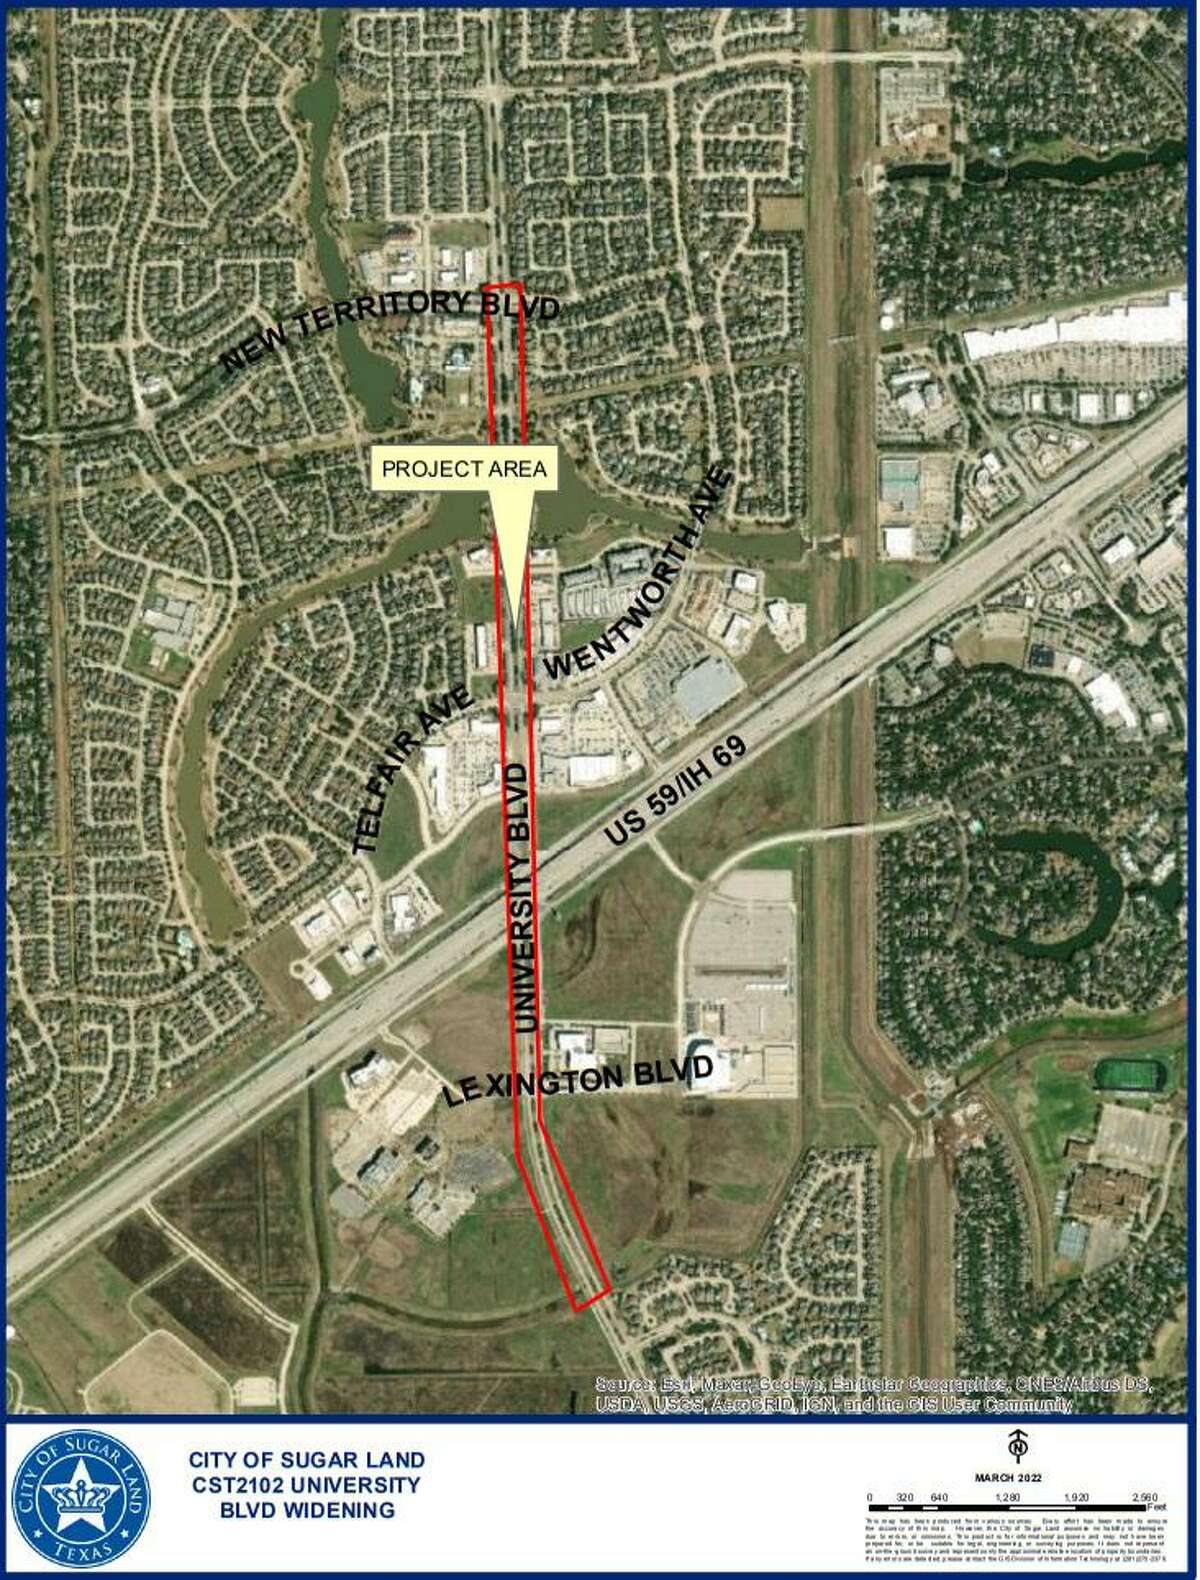 The Sugar Land City Council approved a $250,000 design contract and a $1.6 million interlocal funding agreement with Fort Bend County for work associated with the widening of University Boulevard.